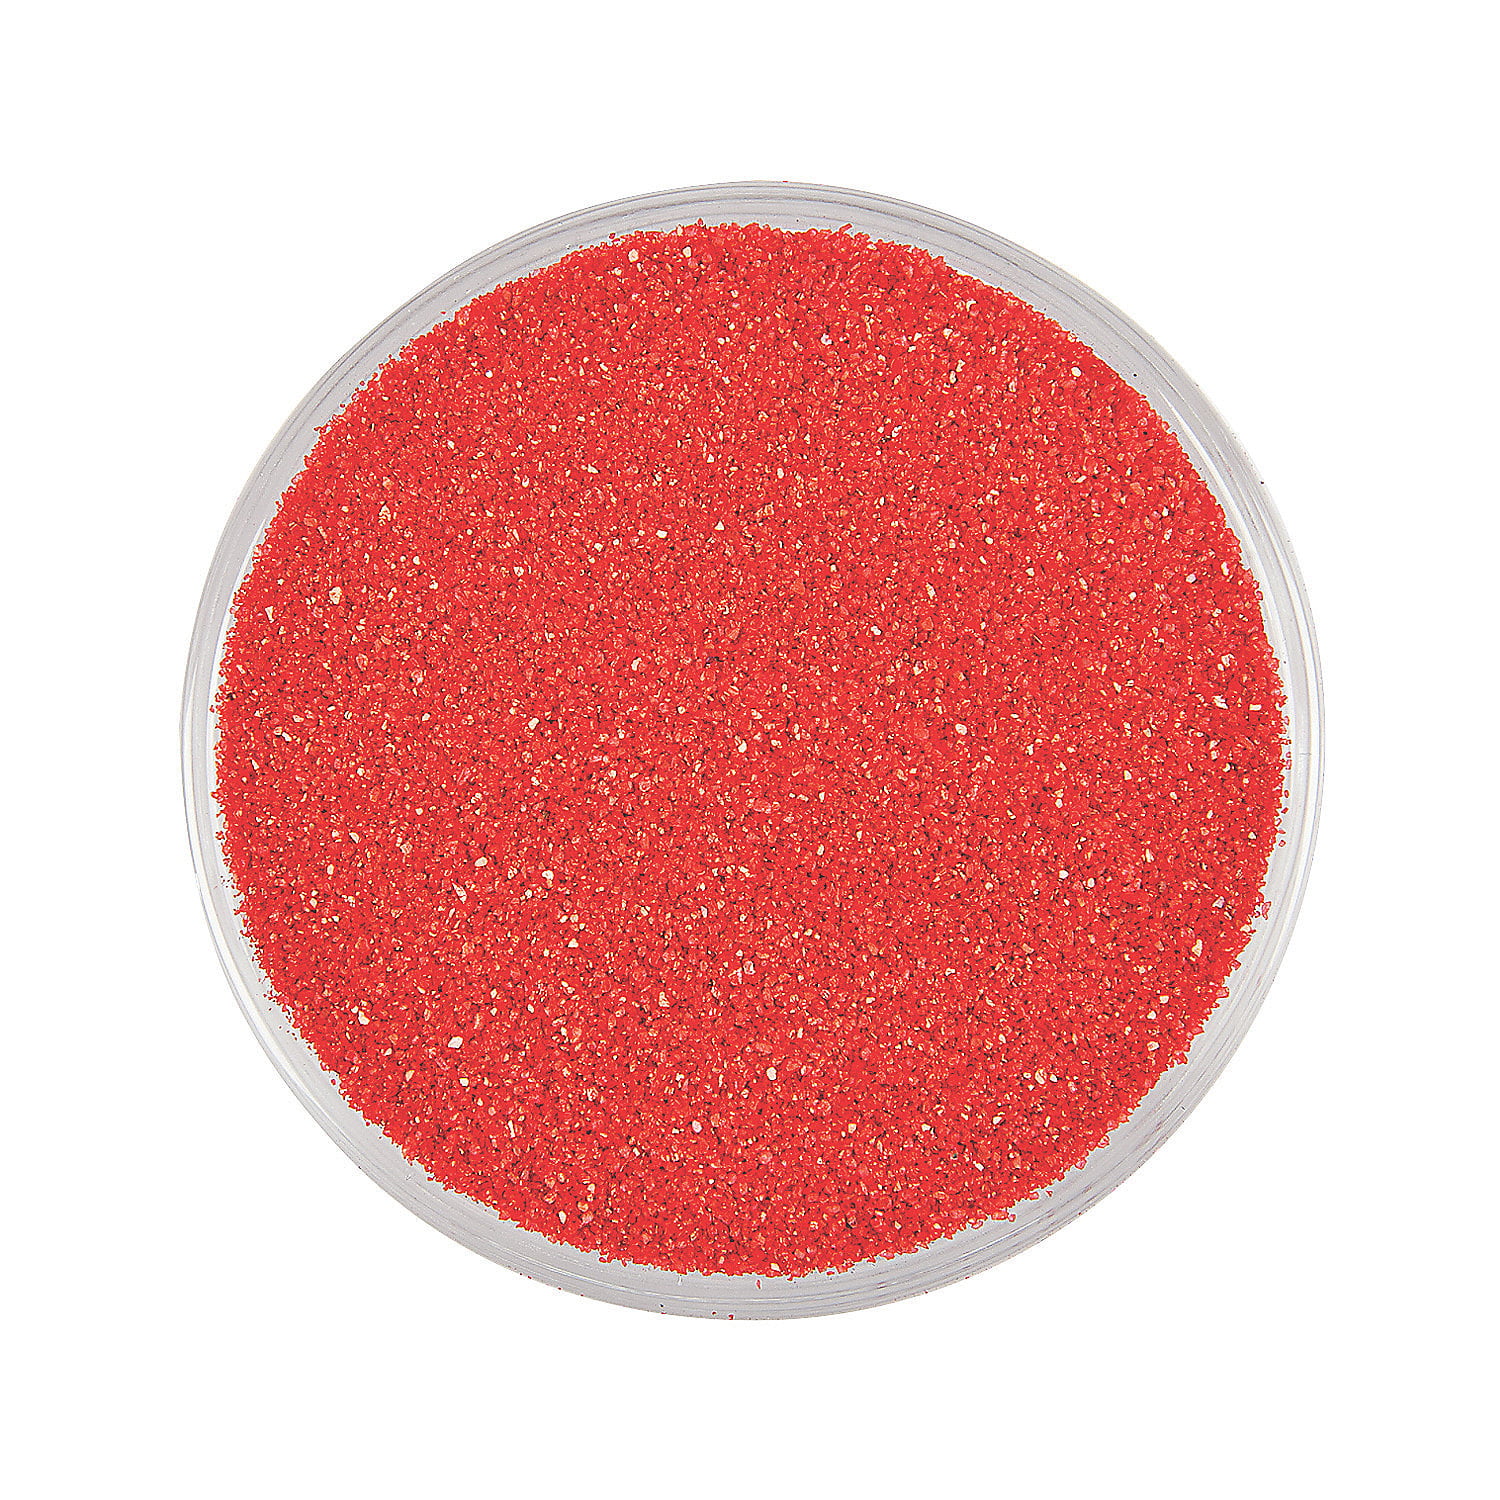 450g RED SAND FOR ART & CRAFT PROJECTS 